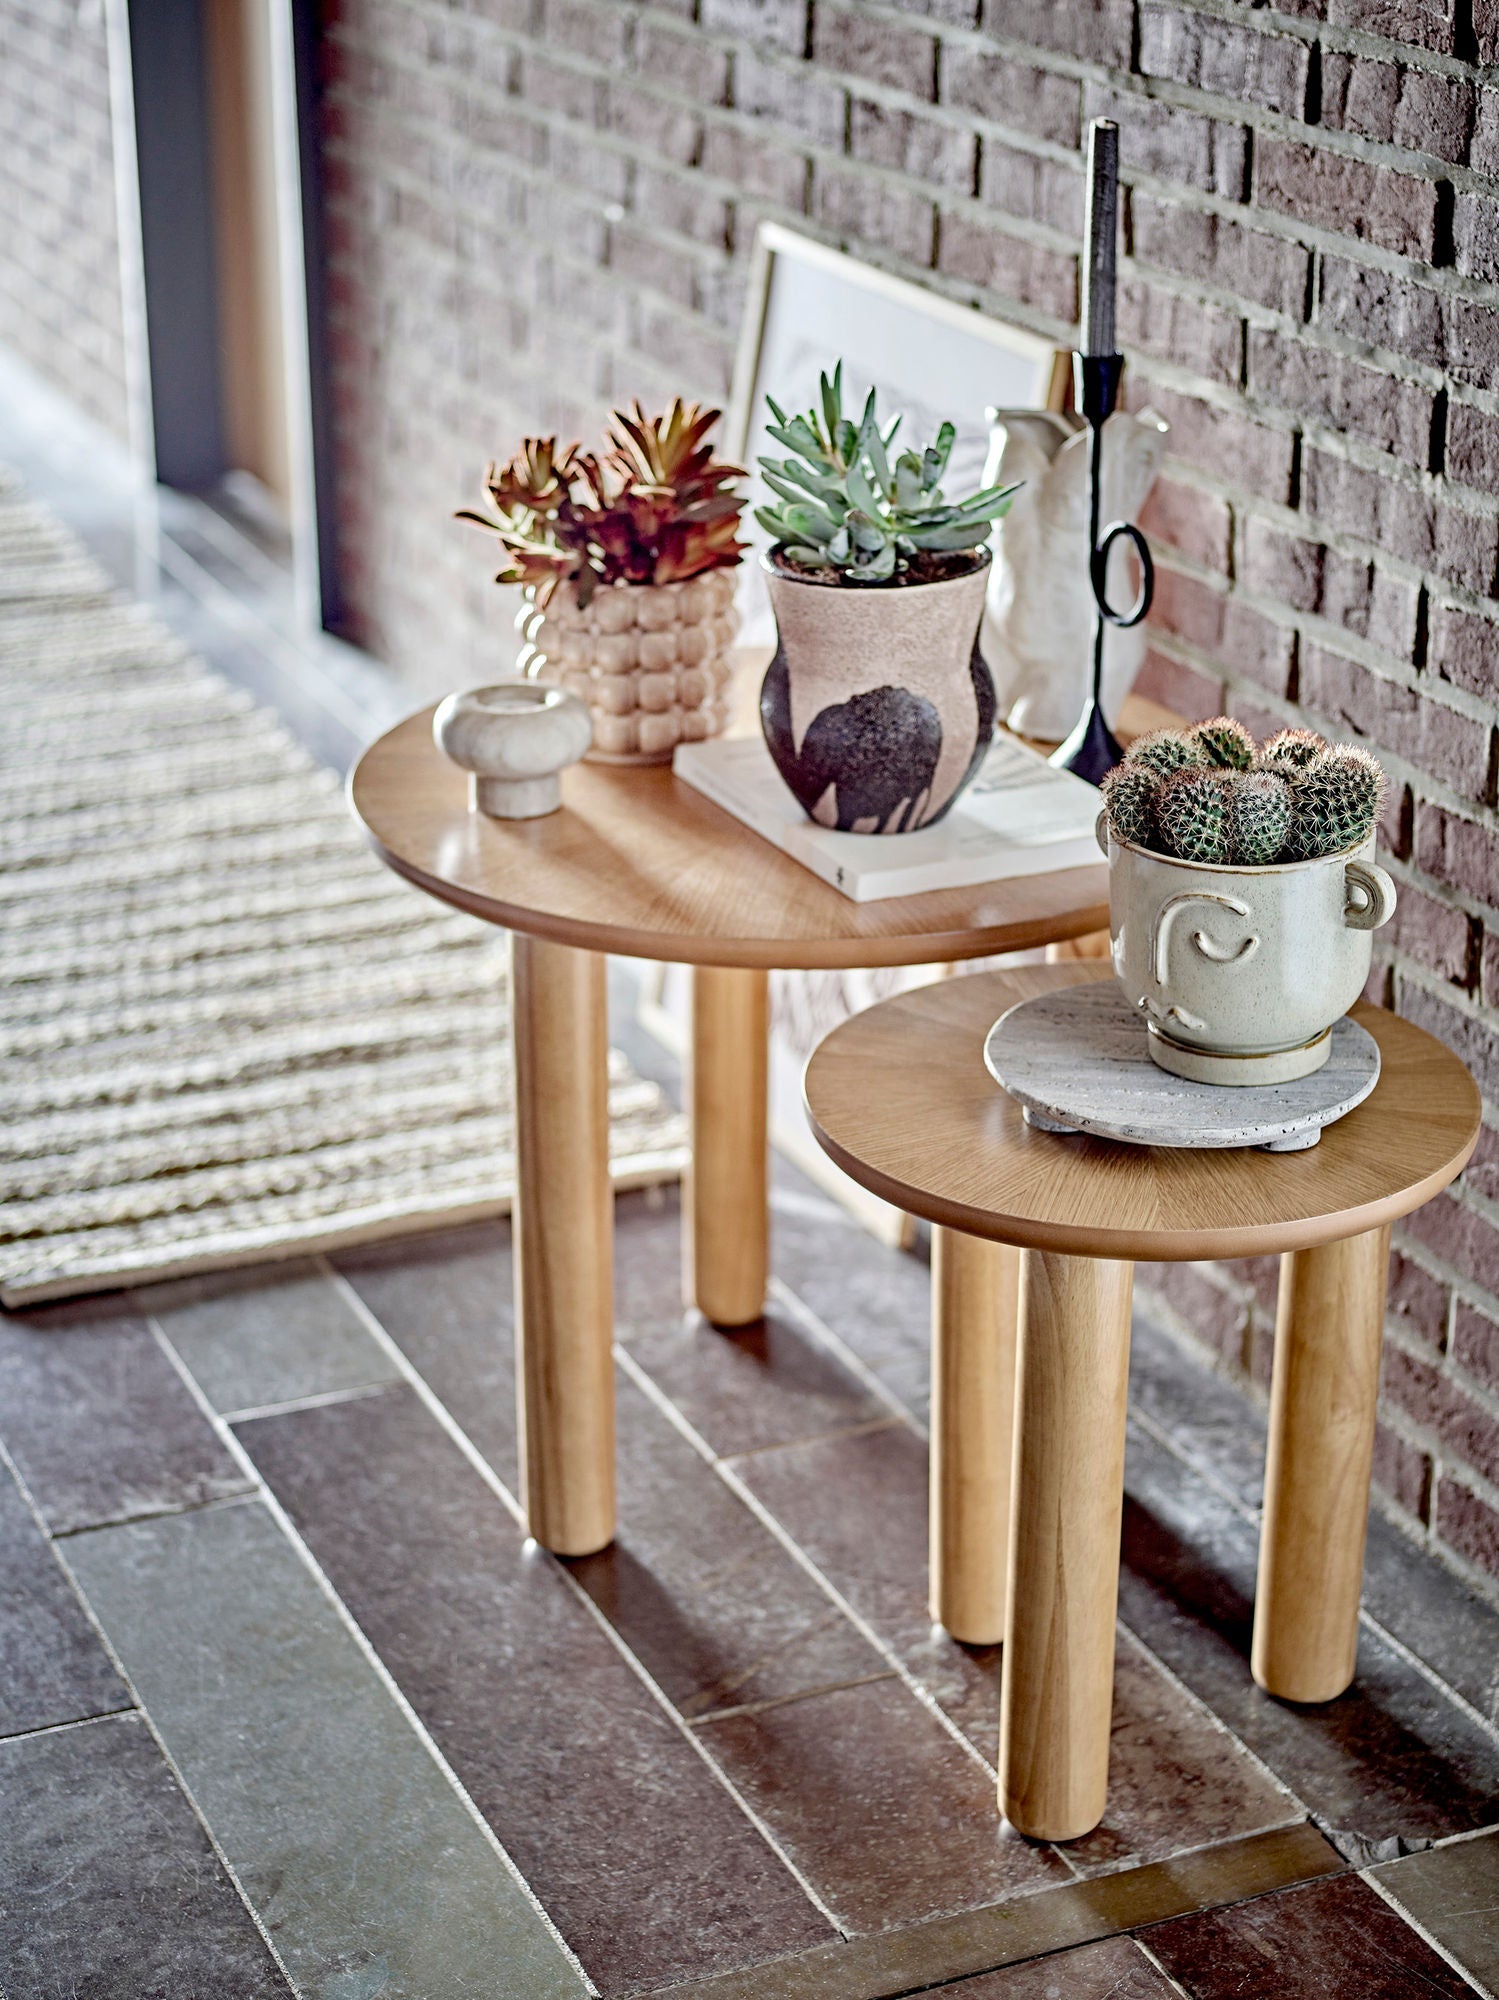 Bloomingville Noma Coffee Table, Nature, Rubberwood